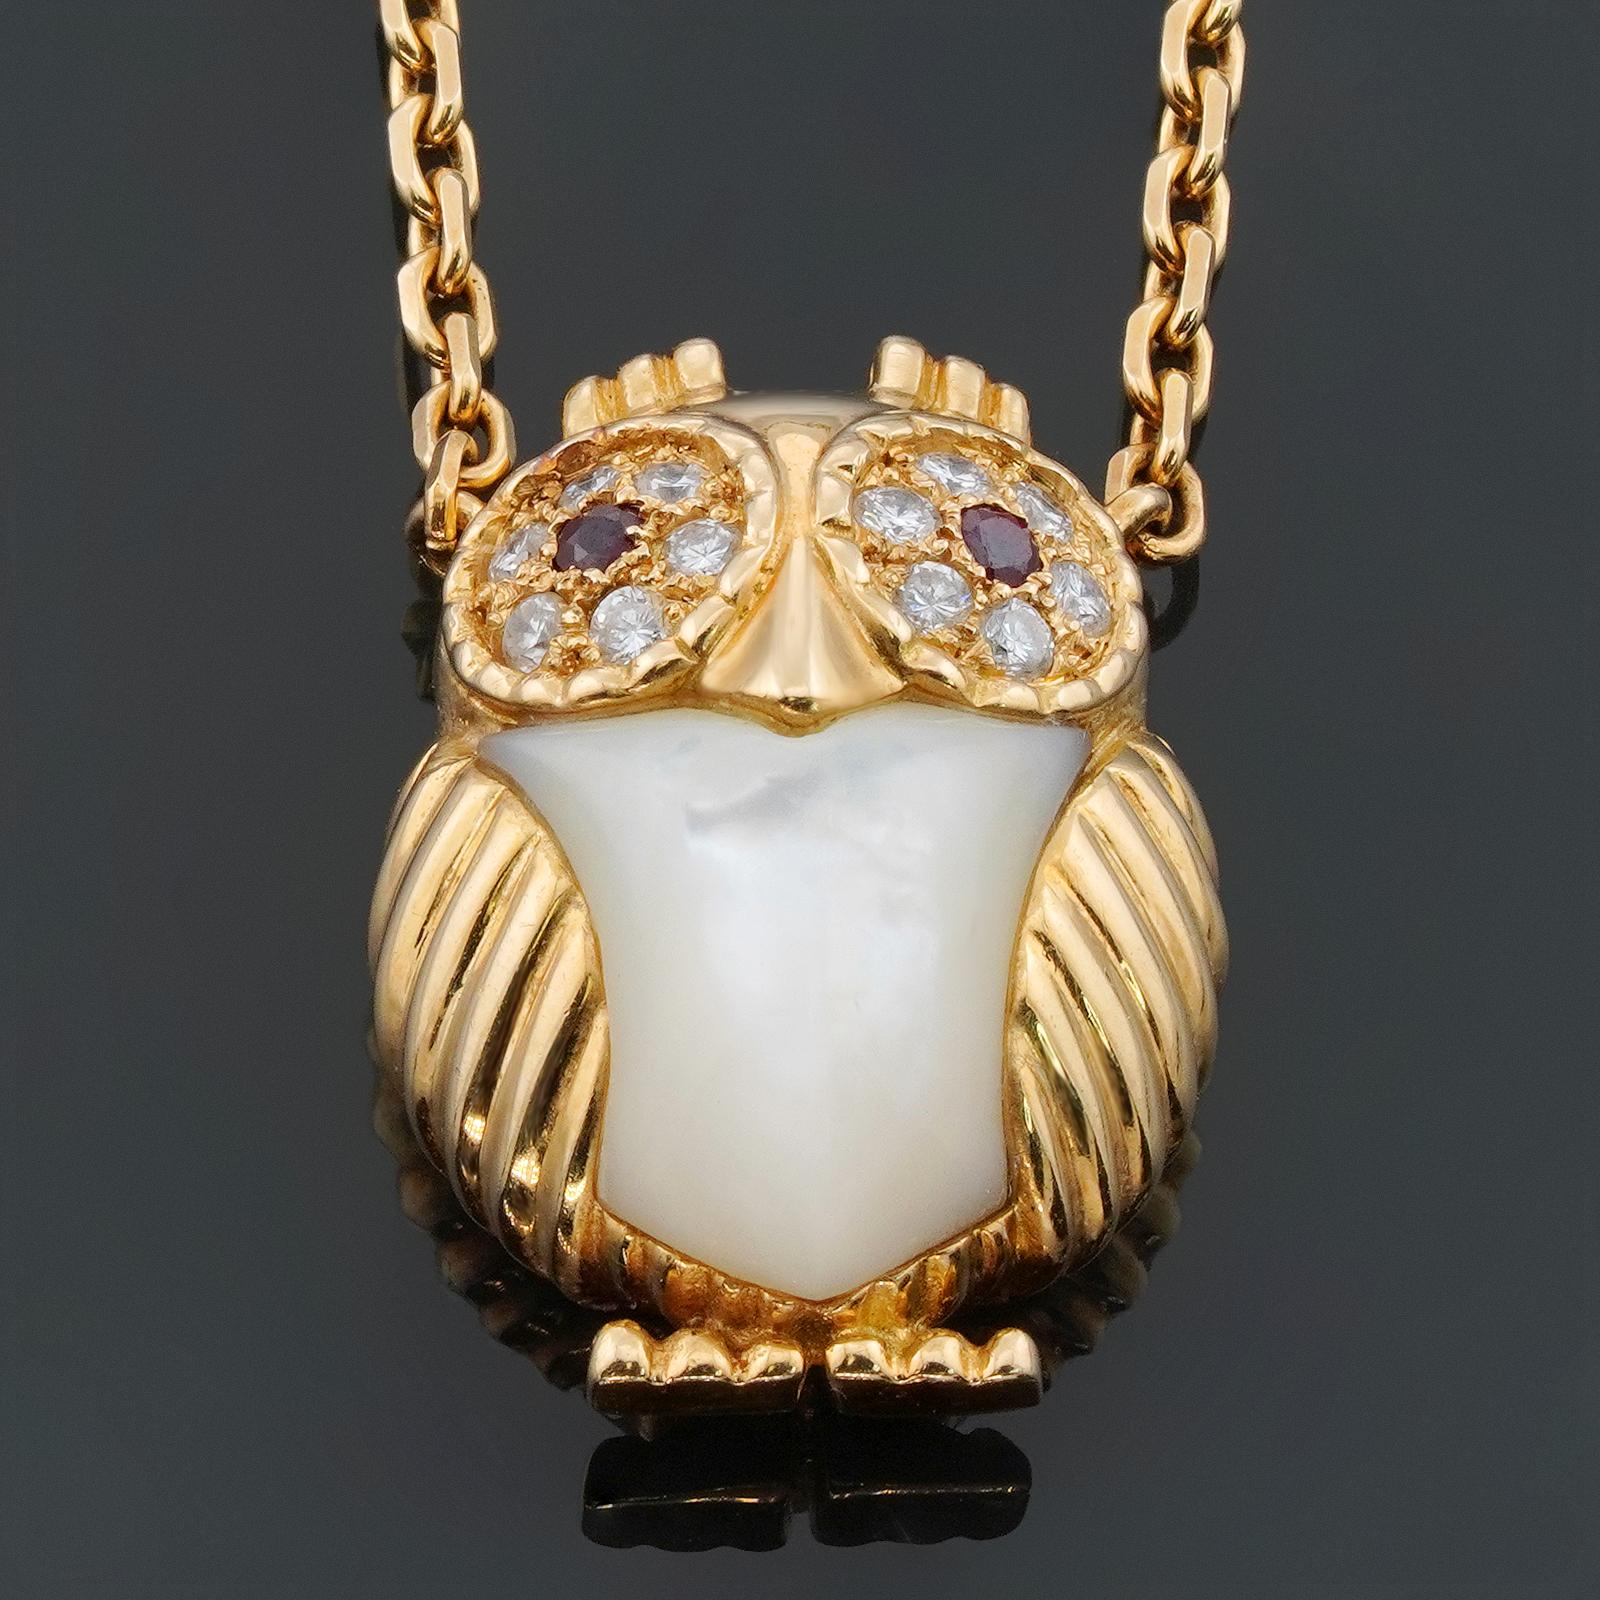 This adorable rare and collectible Van Cleef & Arpels 18k yellow gold necklace features a 15.0mm x 21.0mm owl pendant set with Mother-of-Pearl and brilliant-cut round E-F-G VVS1-VVS2 diamonds weighing an estimated 0.18 carats and round rubies